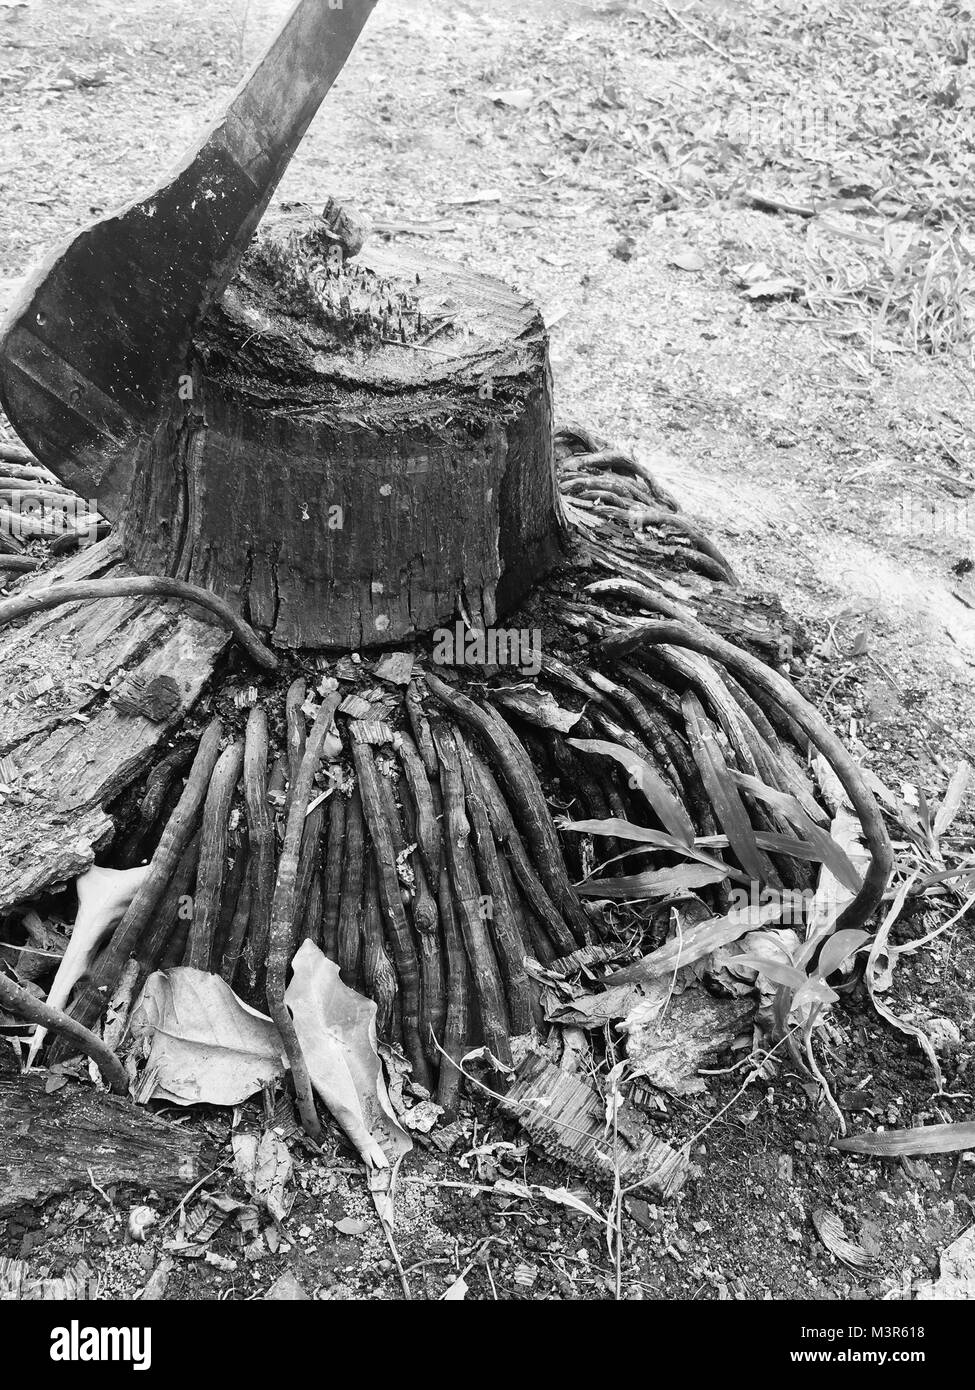 Trees were felled, leaving only a stump, A knife stuck in the top, on a black and white image. Stock Photo